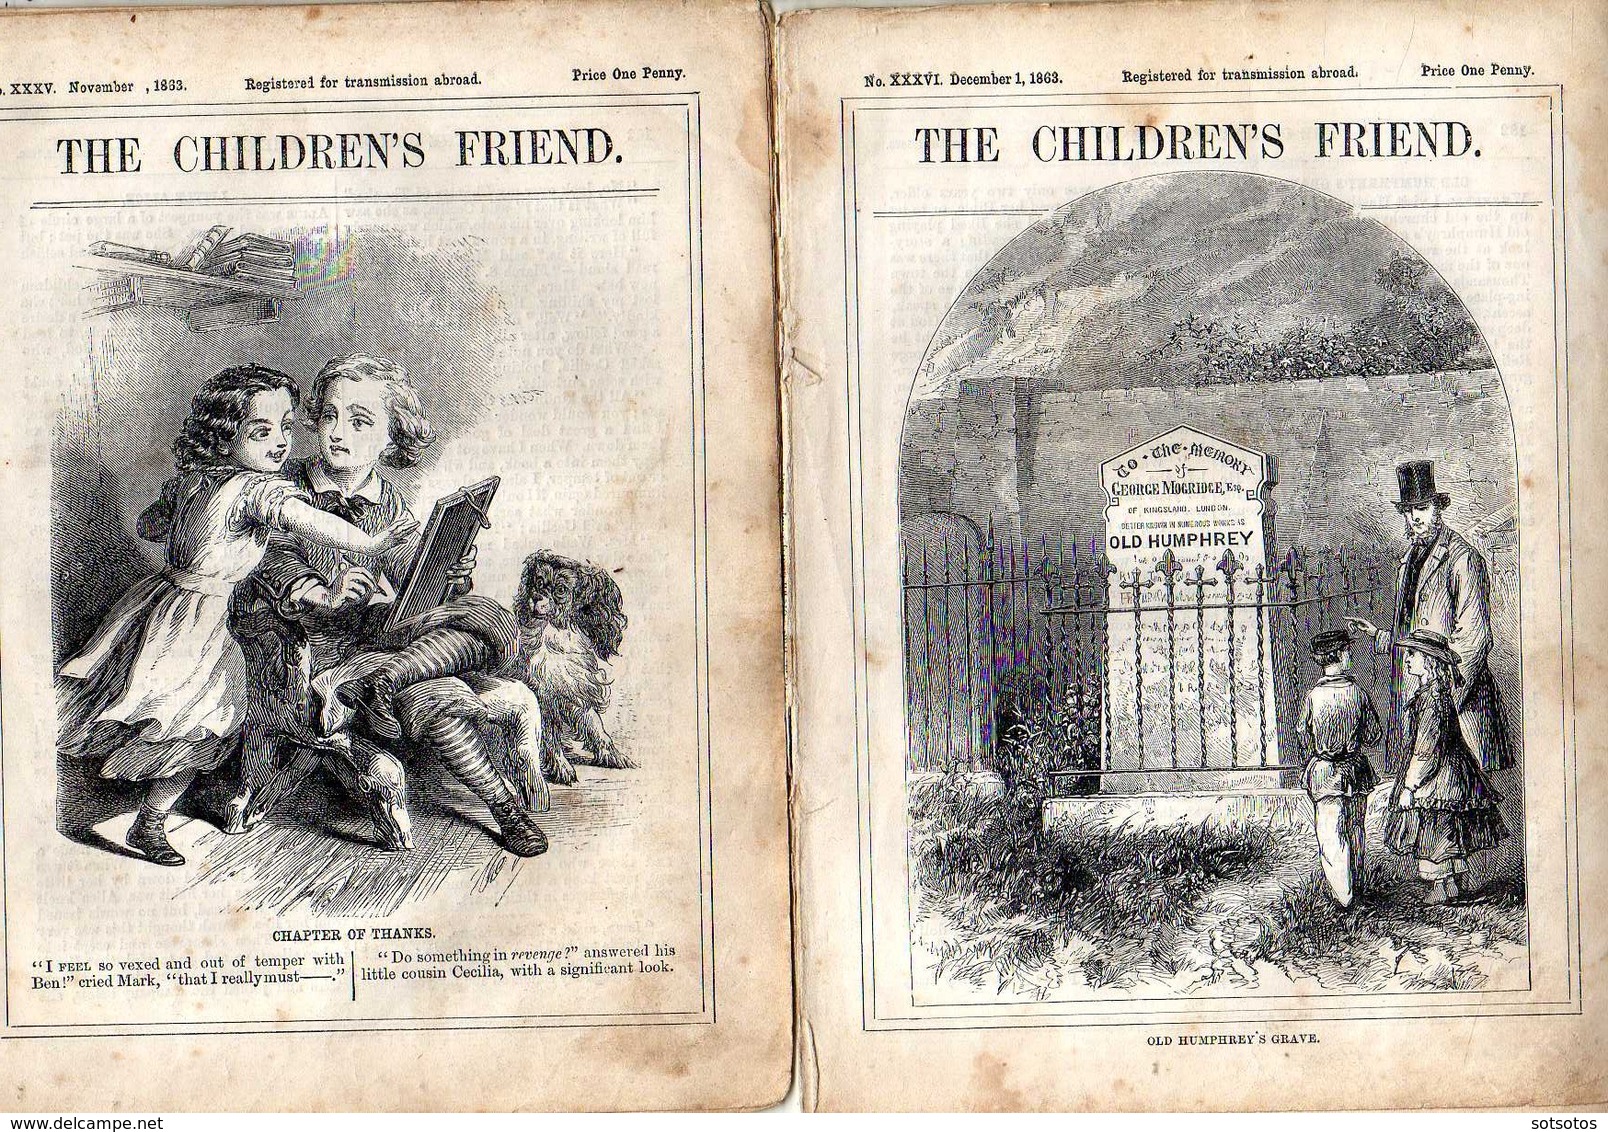 The Childrens Friend: No XXV to XXXVI - 12 issues of 1863 (Jan to Dec) with too many pictures and many interesting artic